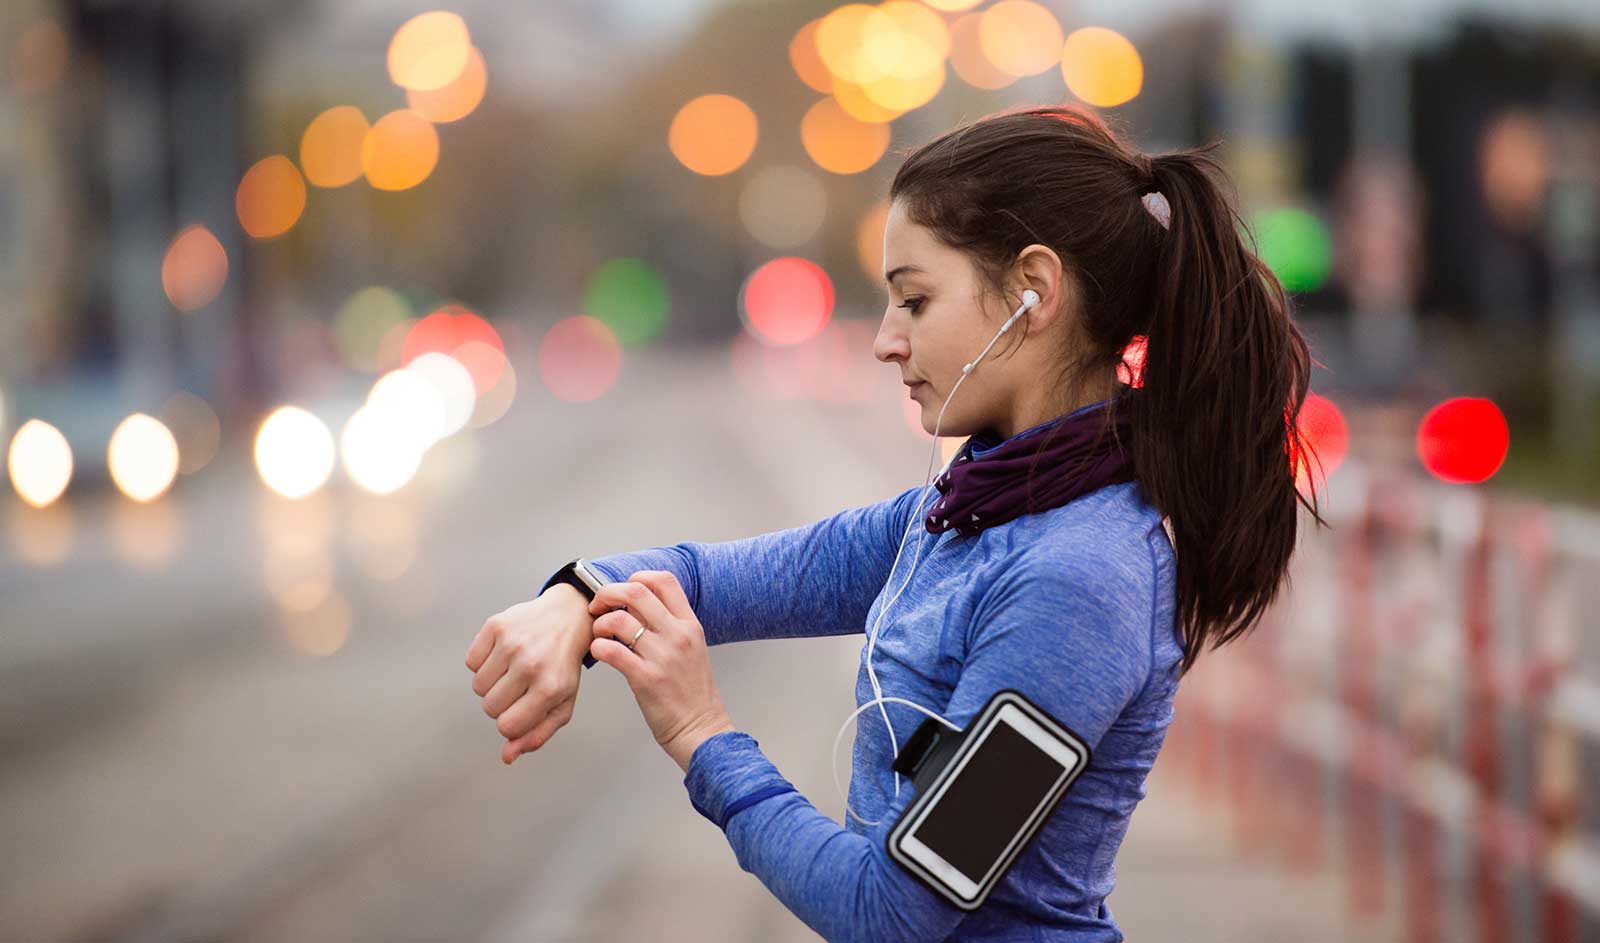 A woman in a blue top checks her fitness tracker, possibly downloaded from free software for personal trainers, while jogging on a city street at dusk, with blurred street lights in the background.